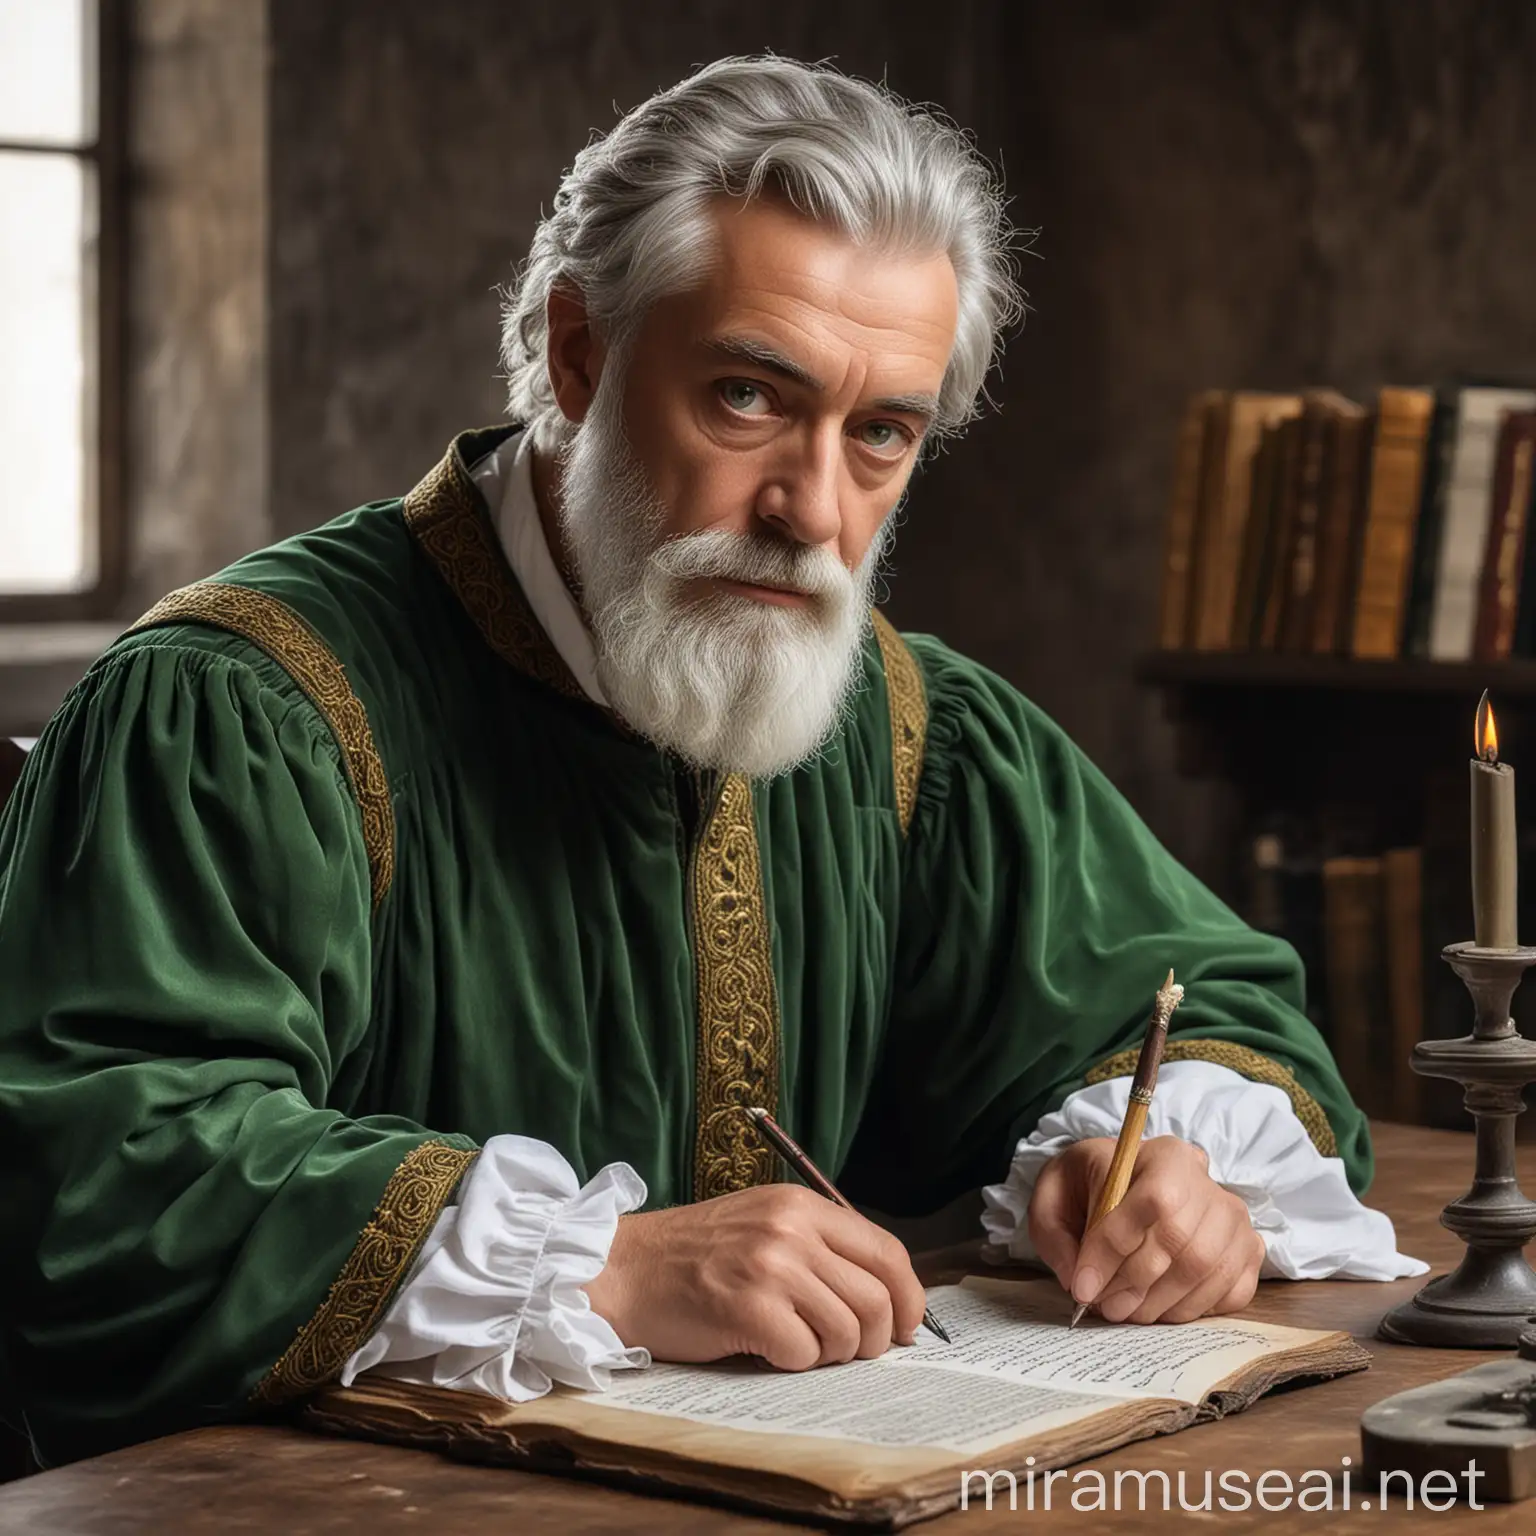 A medieval old teache with grey hair and beard, green eyes and fair skin. He is the head teacher of AN Accademia. He is writing at his desk